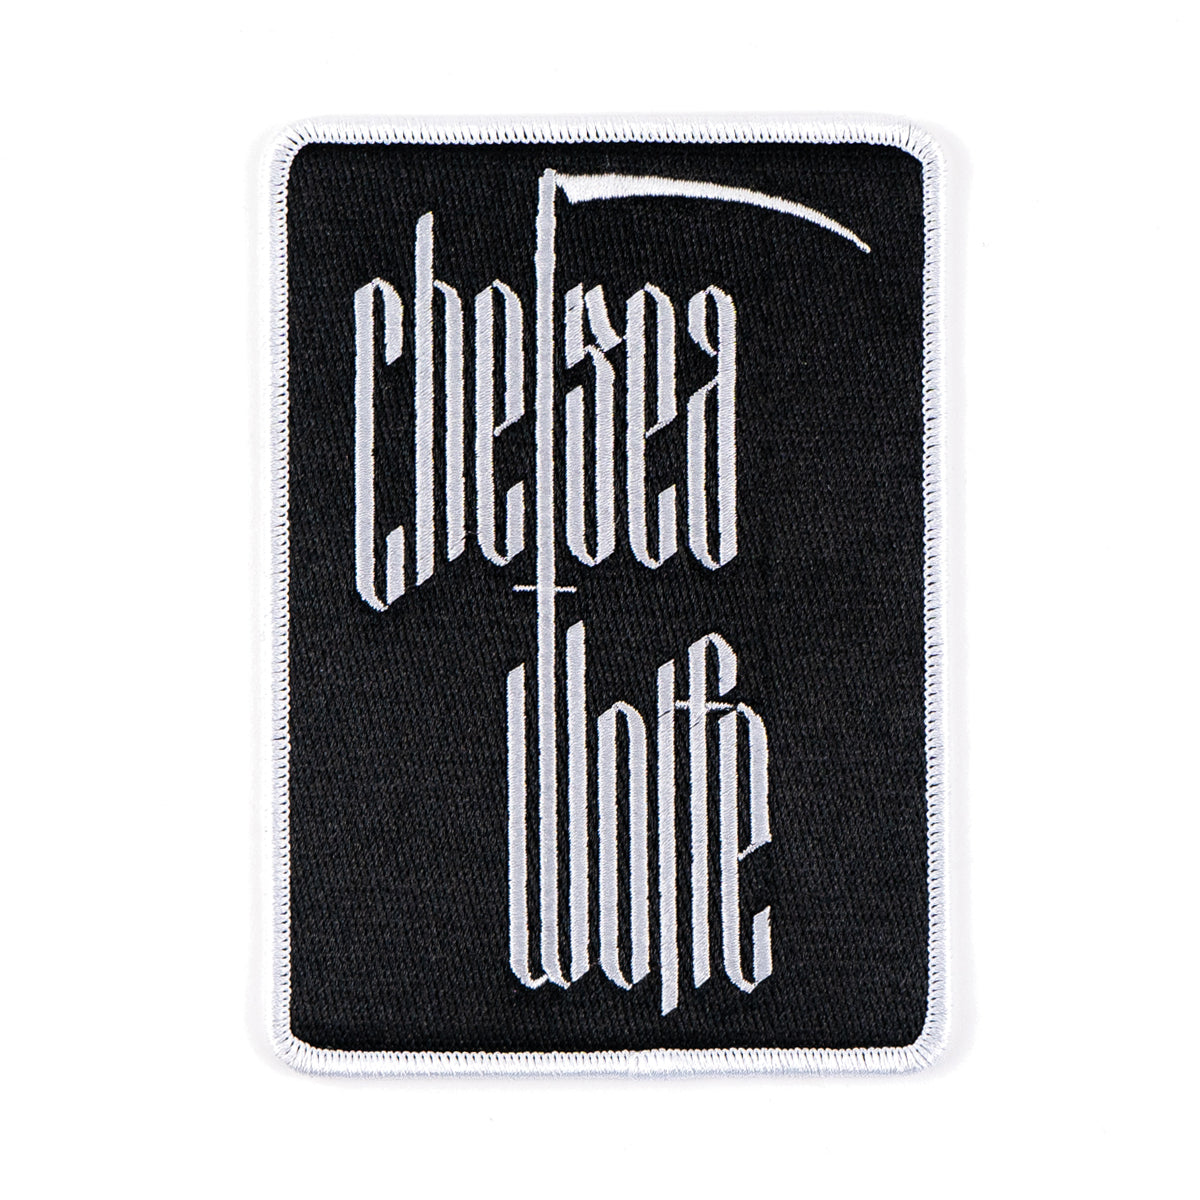 CHELSEA WOLFE "Scythe" Patch